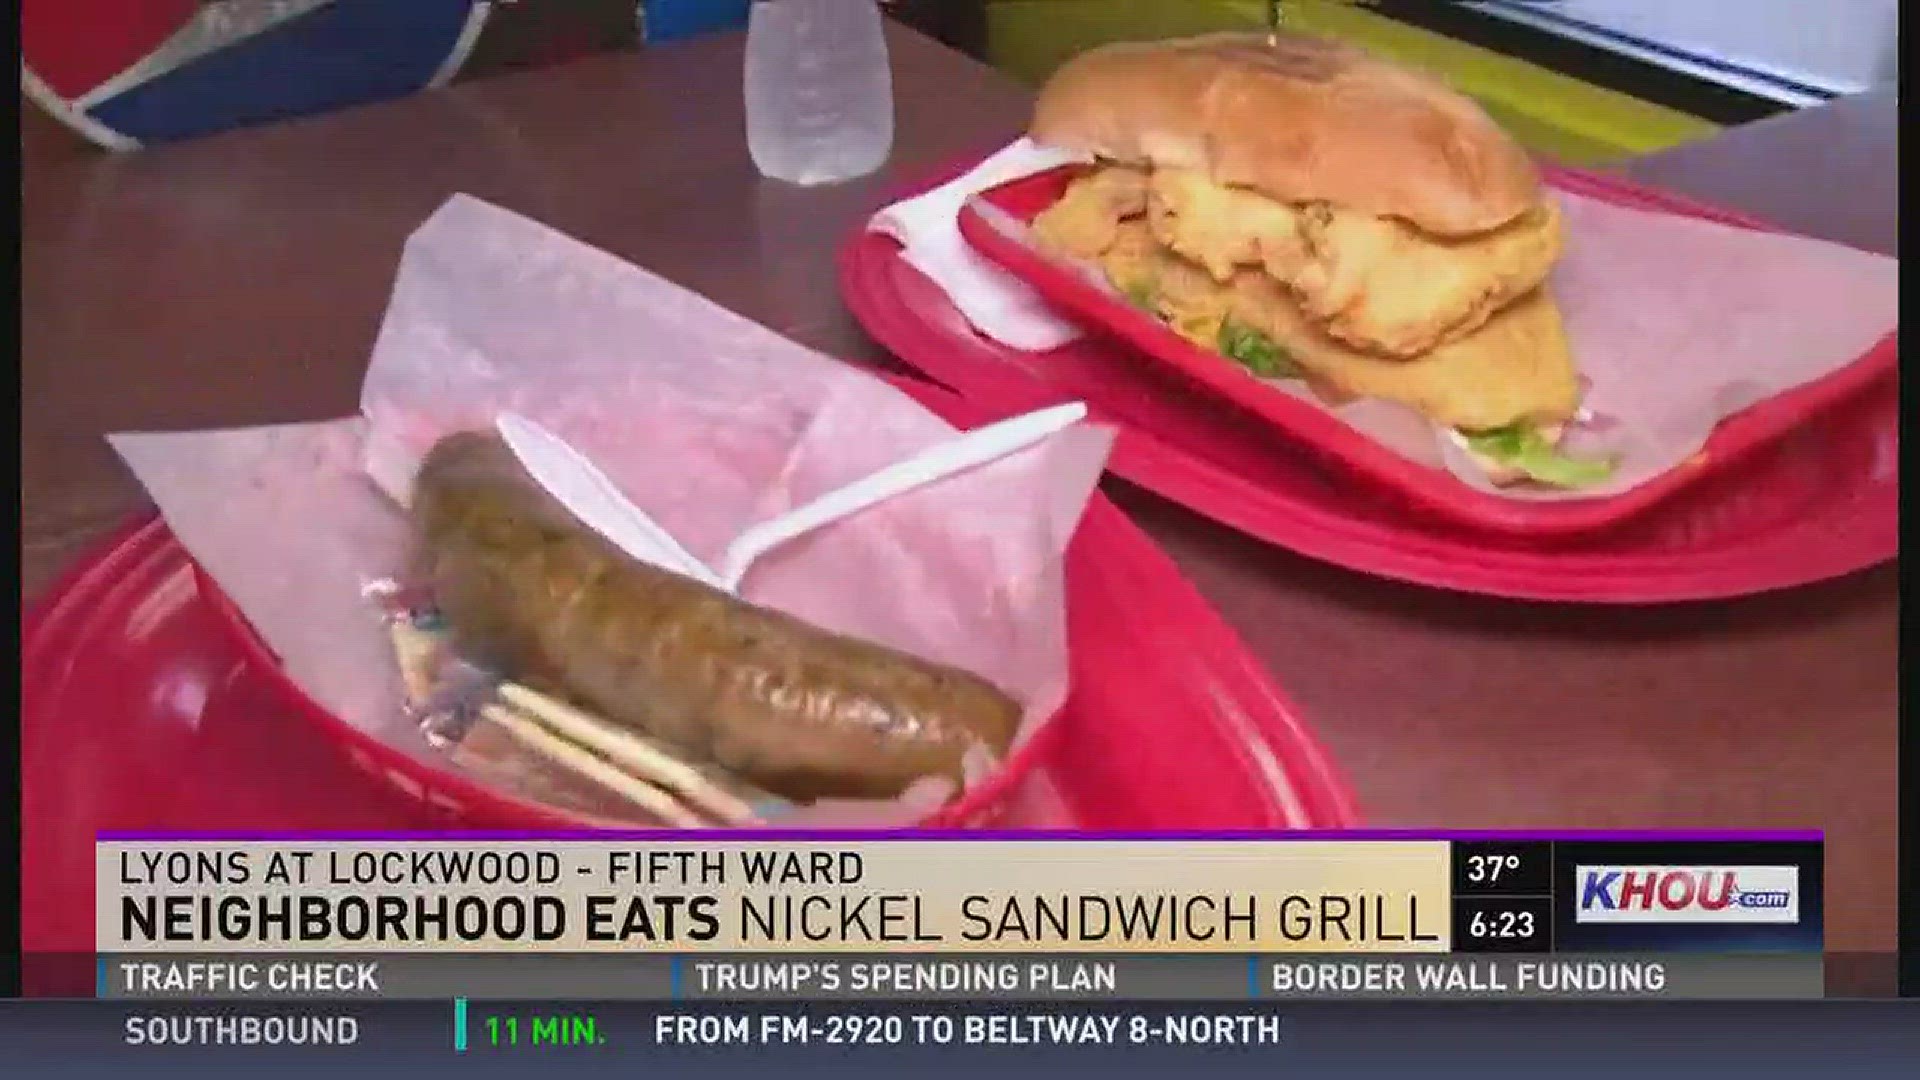 In Monday morning's Neighborhood Eats, Sherry Williams visited the Fifth Ward to take in the Nickel Sandwich Grill.